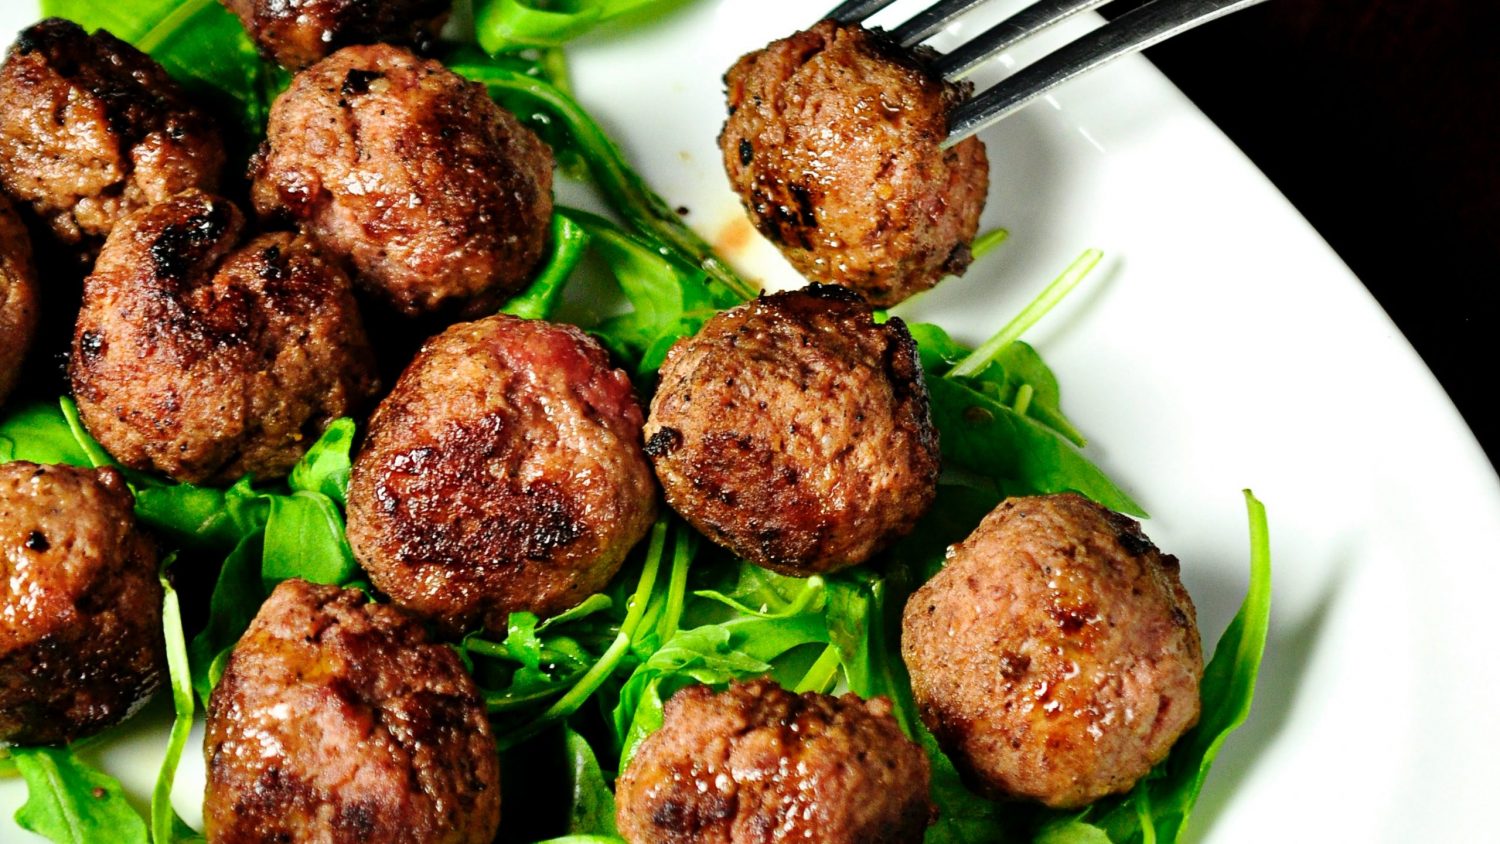 Meatballs and greens on a plate